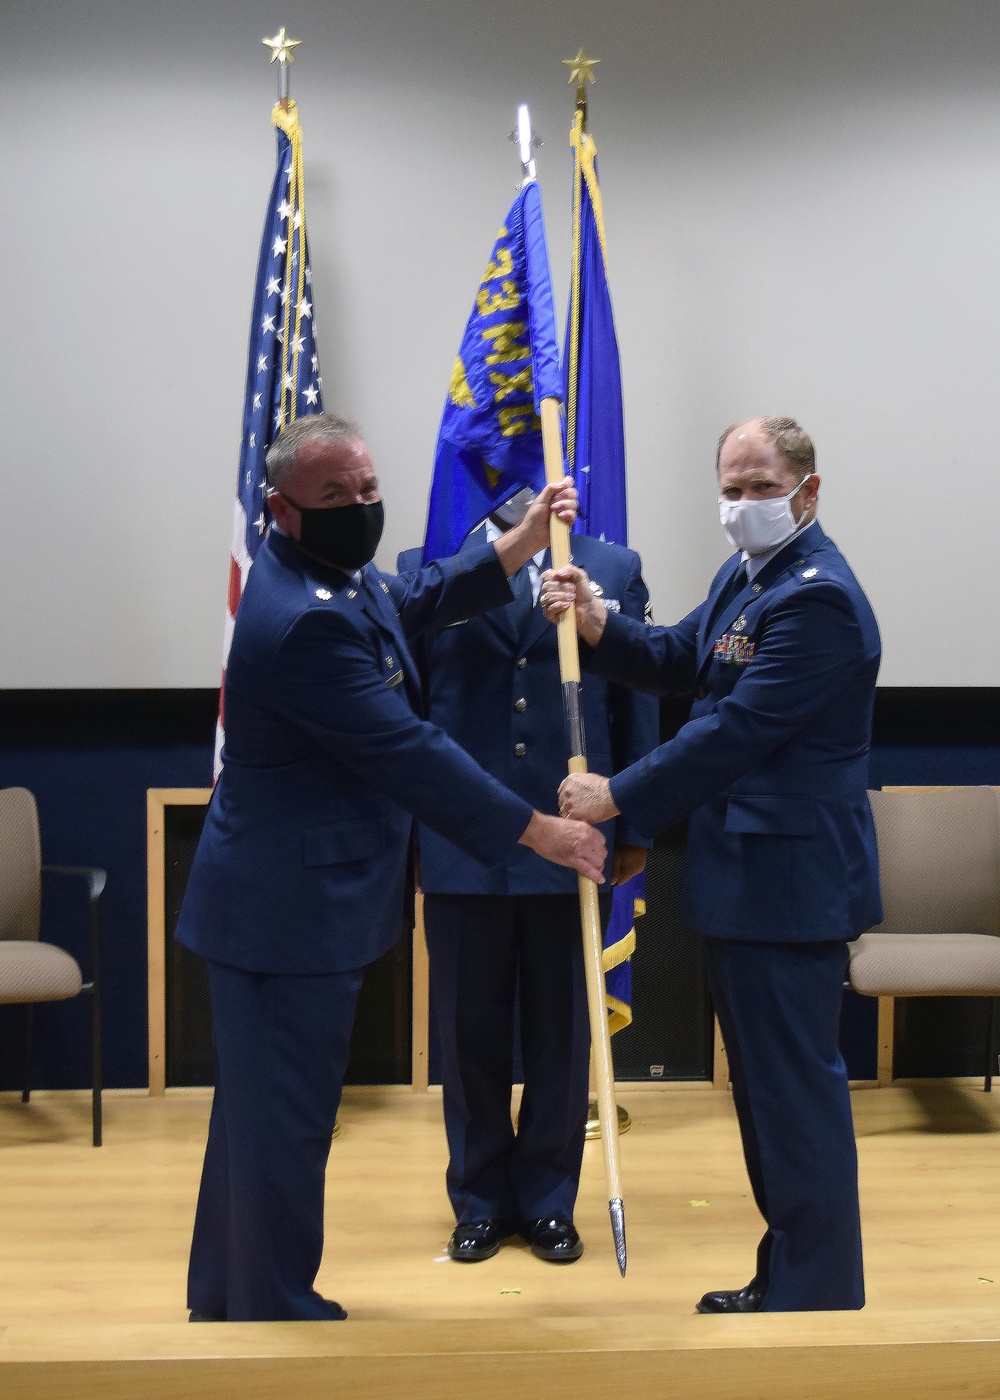 433rd AMXS welcomes new commander